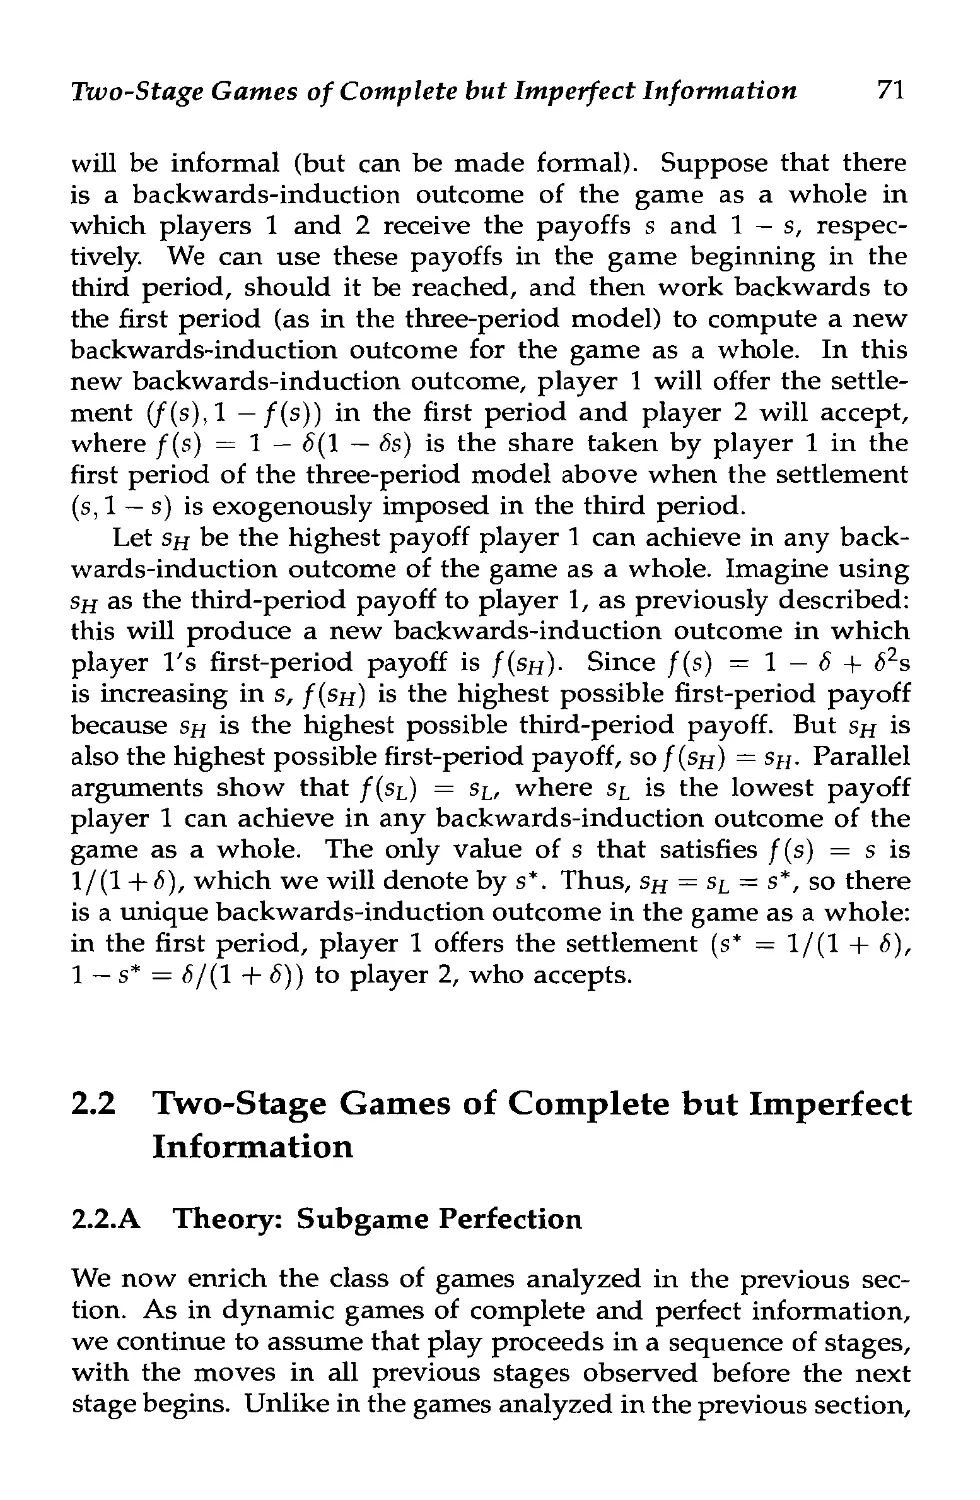 2.2 Two-Stage Games of Complete but Imperfect Information